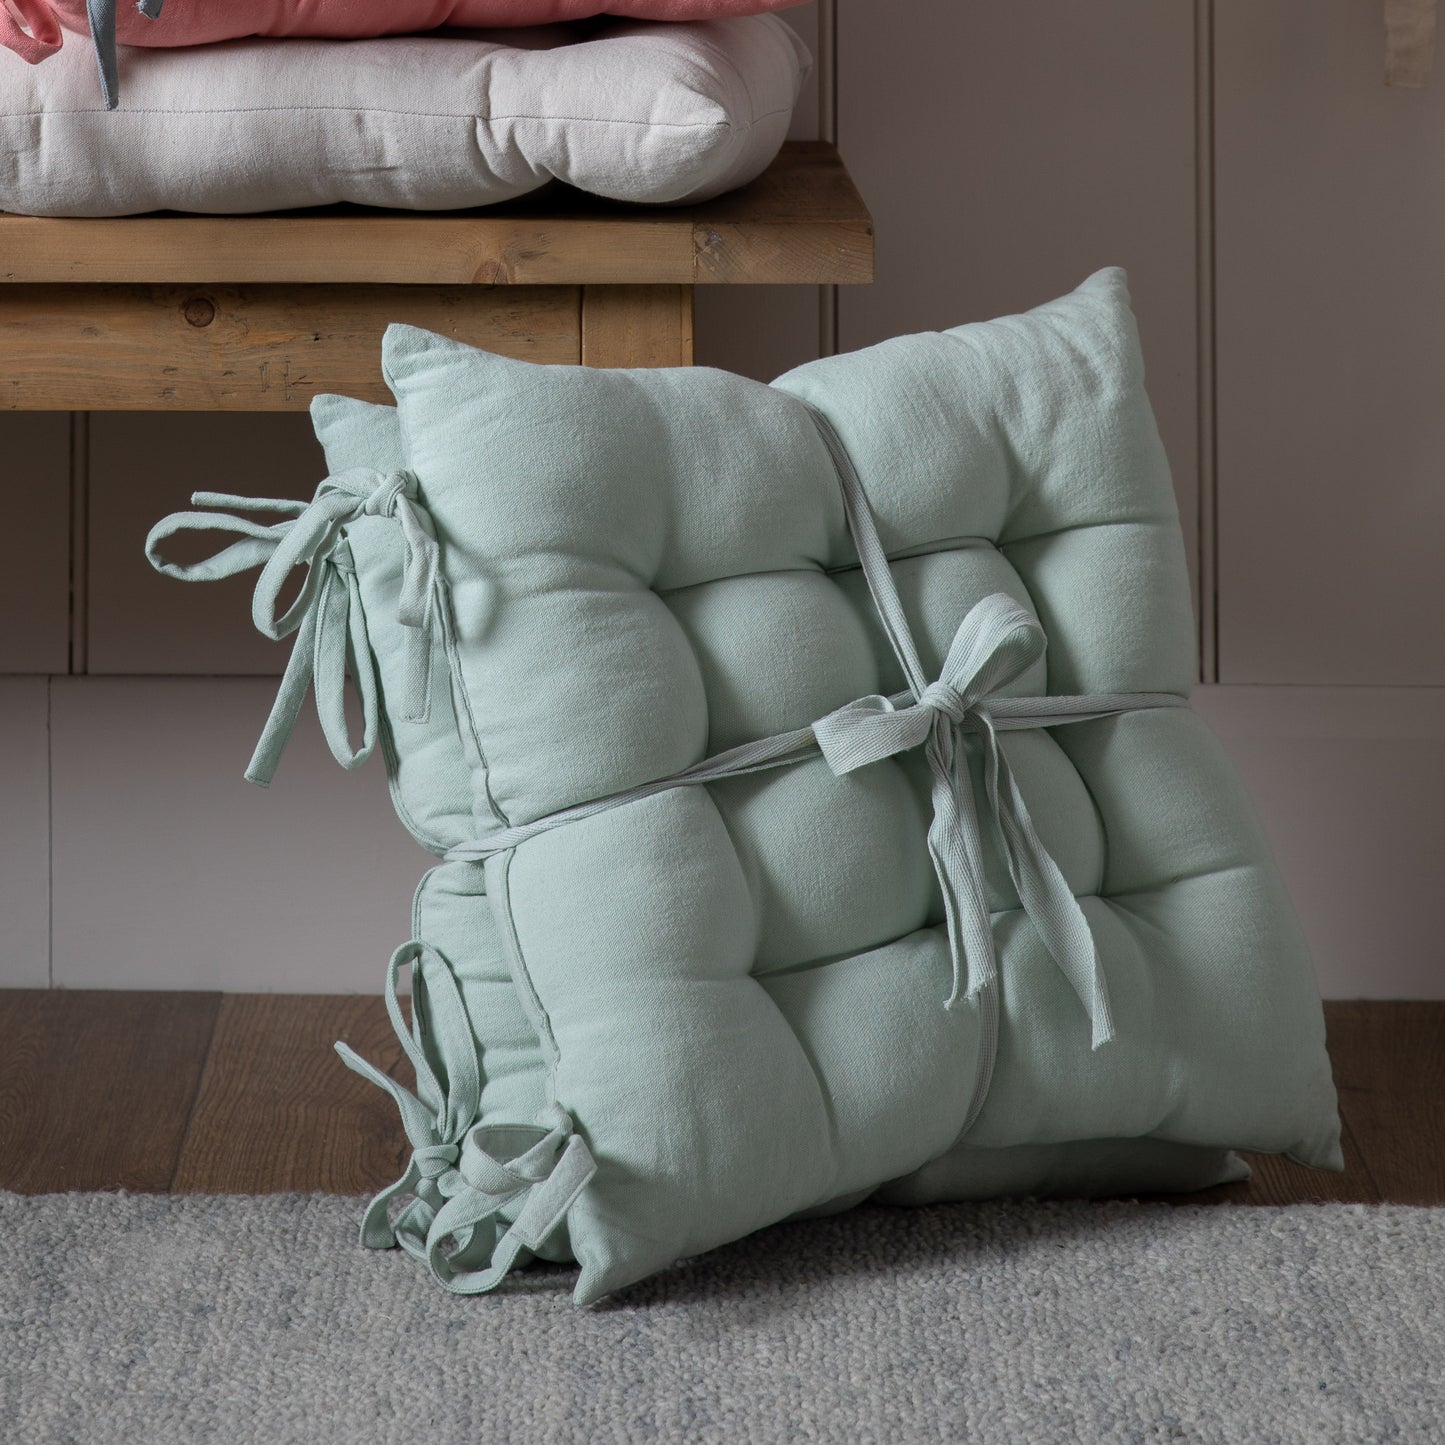 A set of SC Plain Cotton Seatpad Aqua 430x430mm (2pk) pillows on a wooden floor adding to the interior decor of the home.